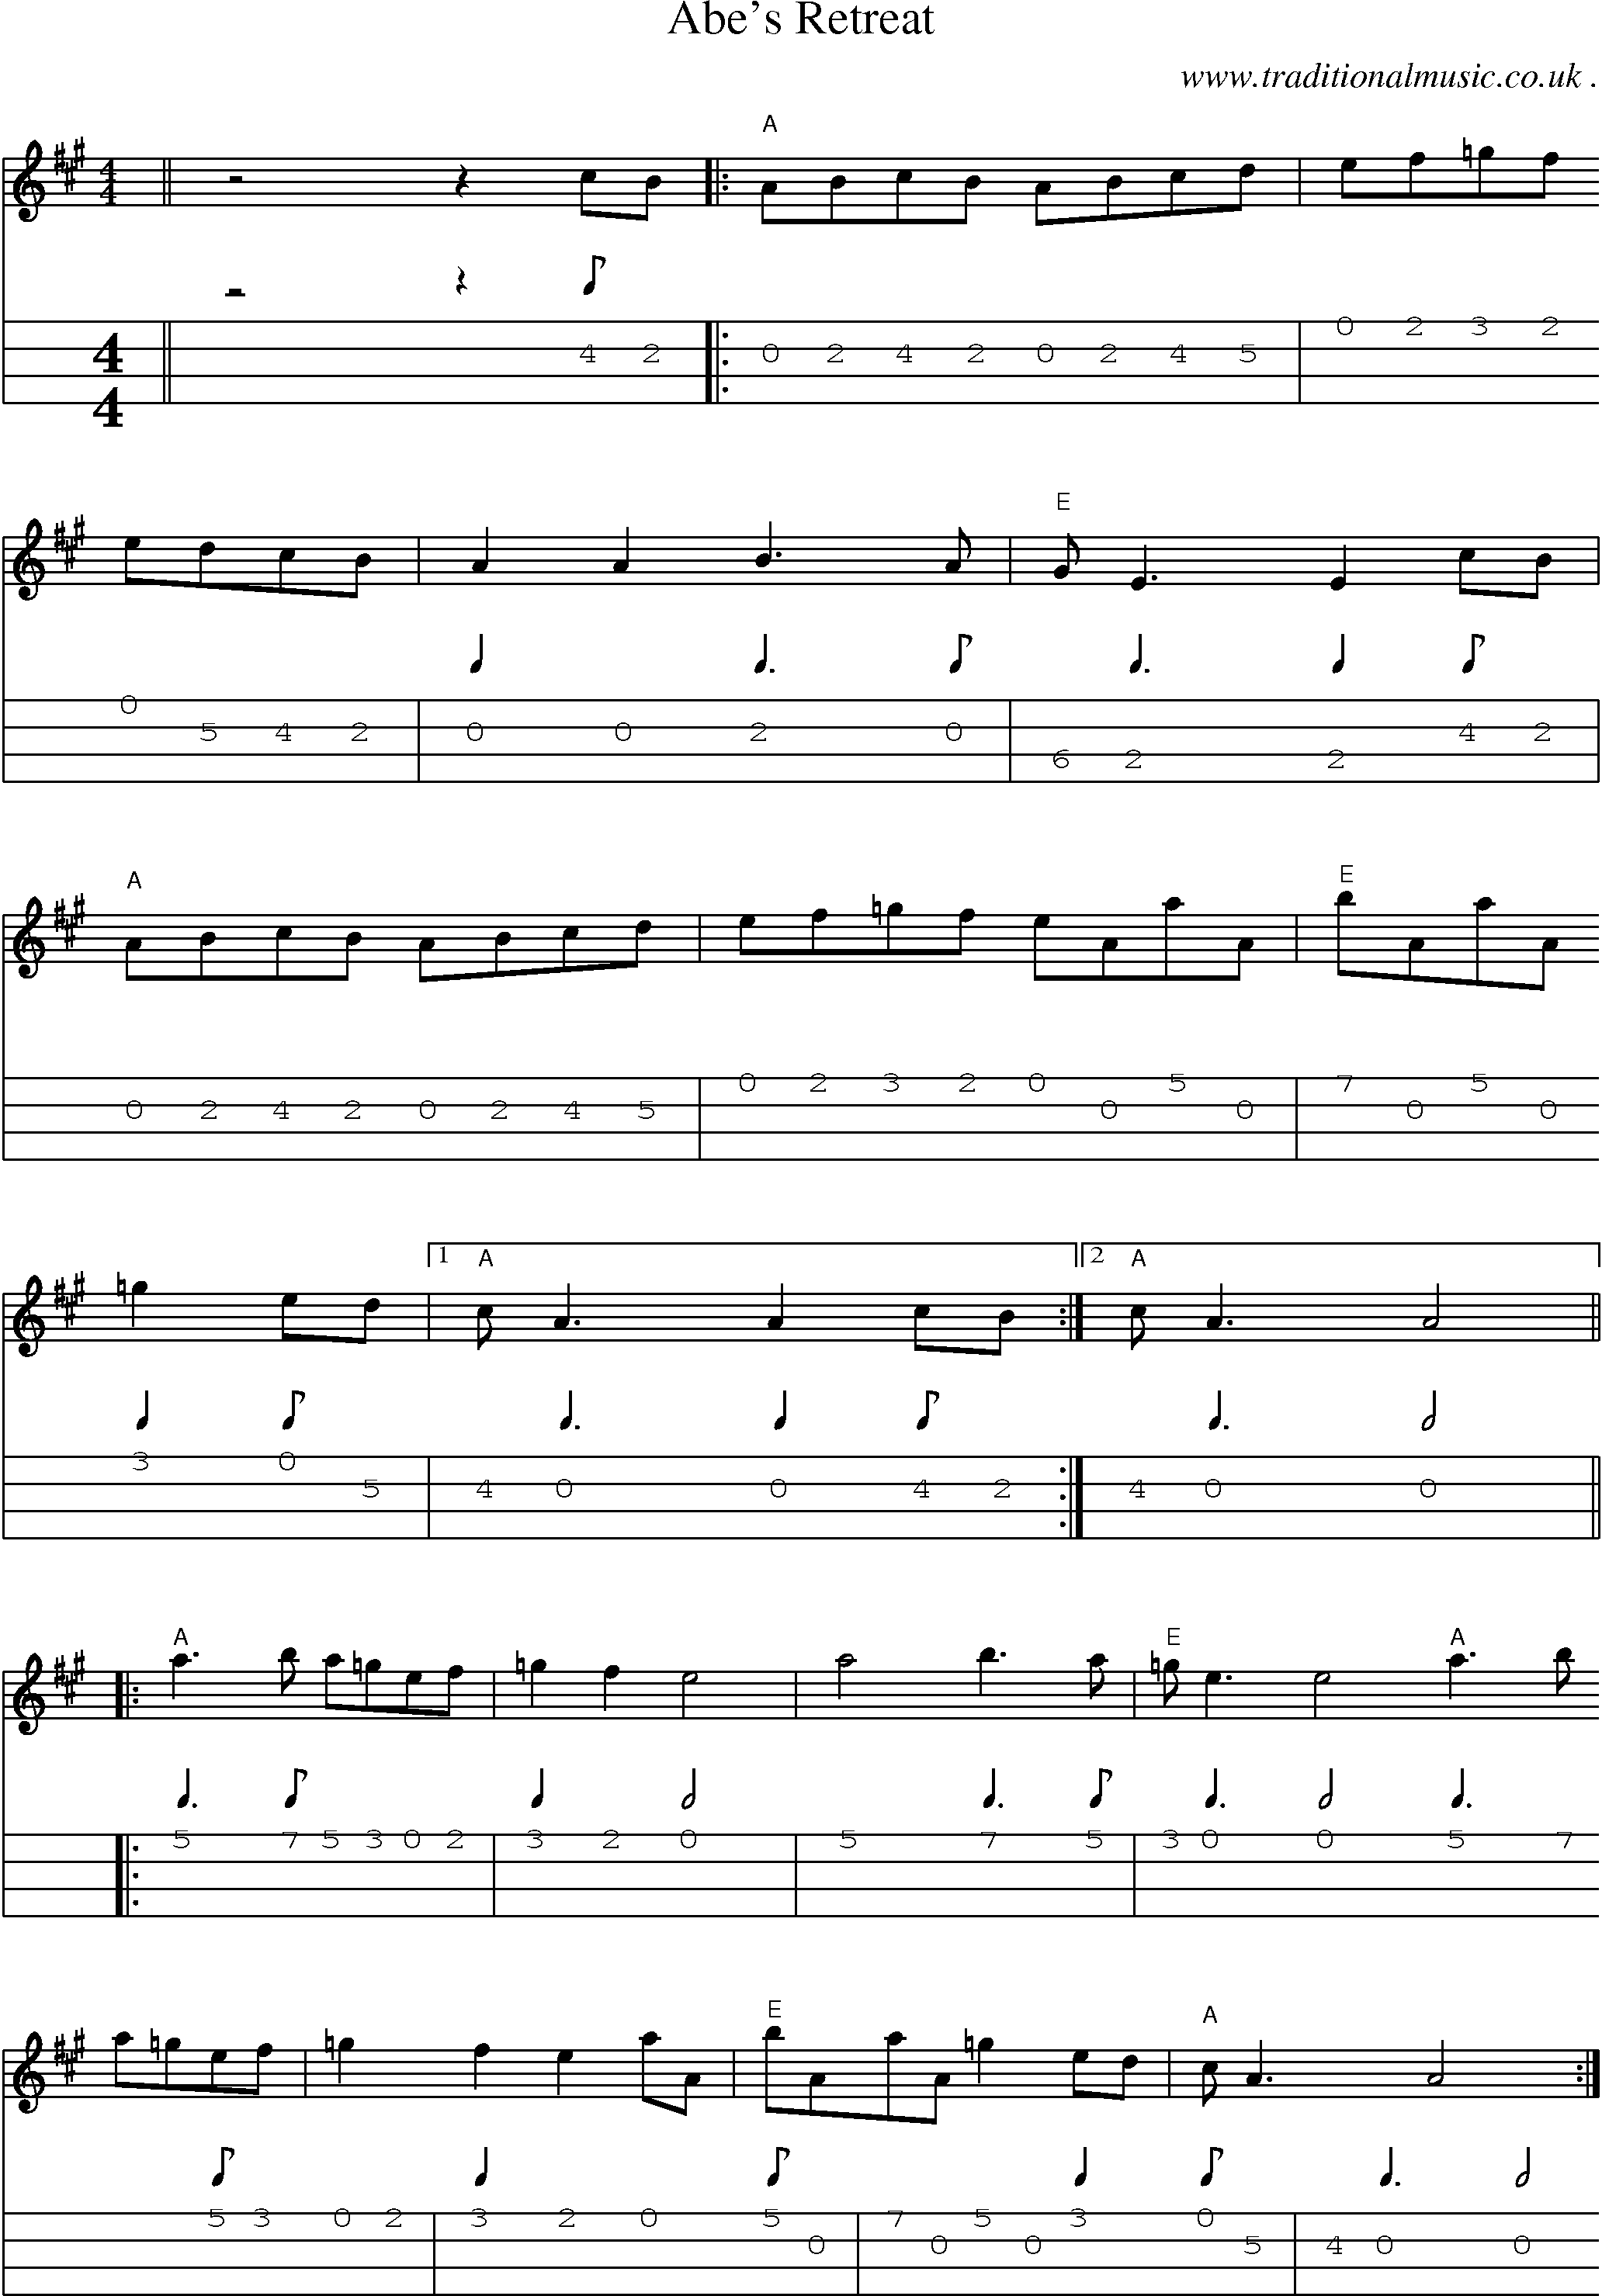 Music Score and Mandolin Tabs for Abes Retreat